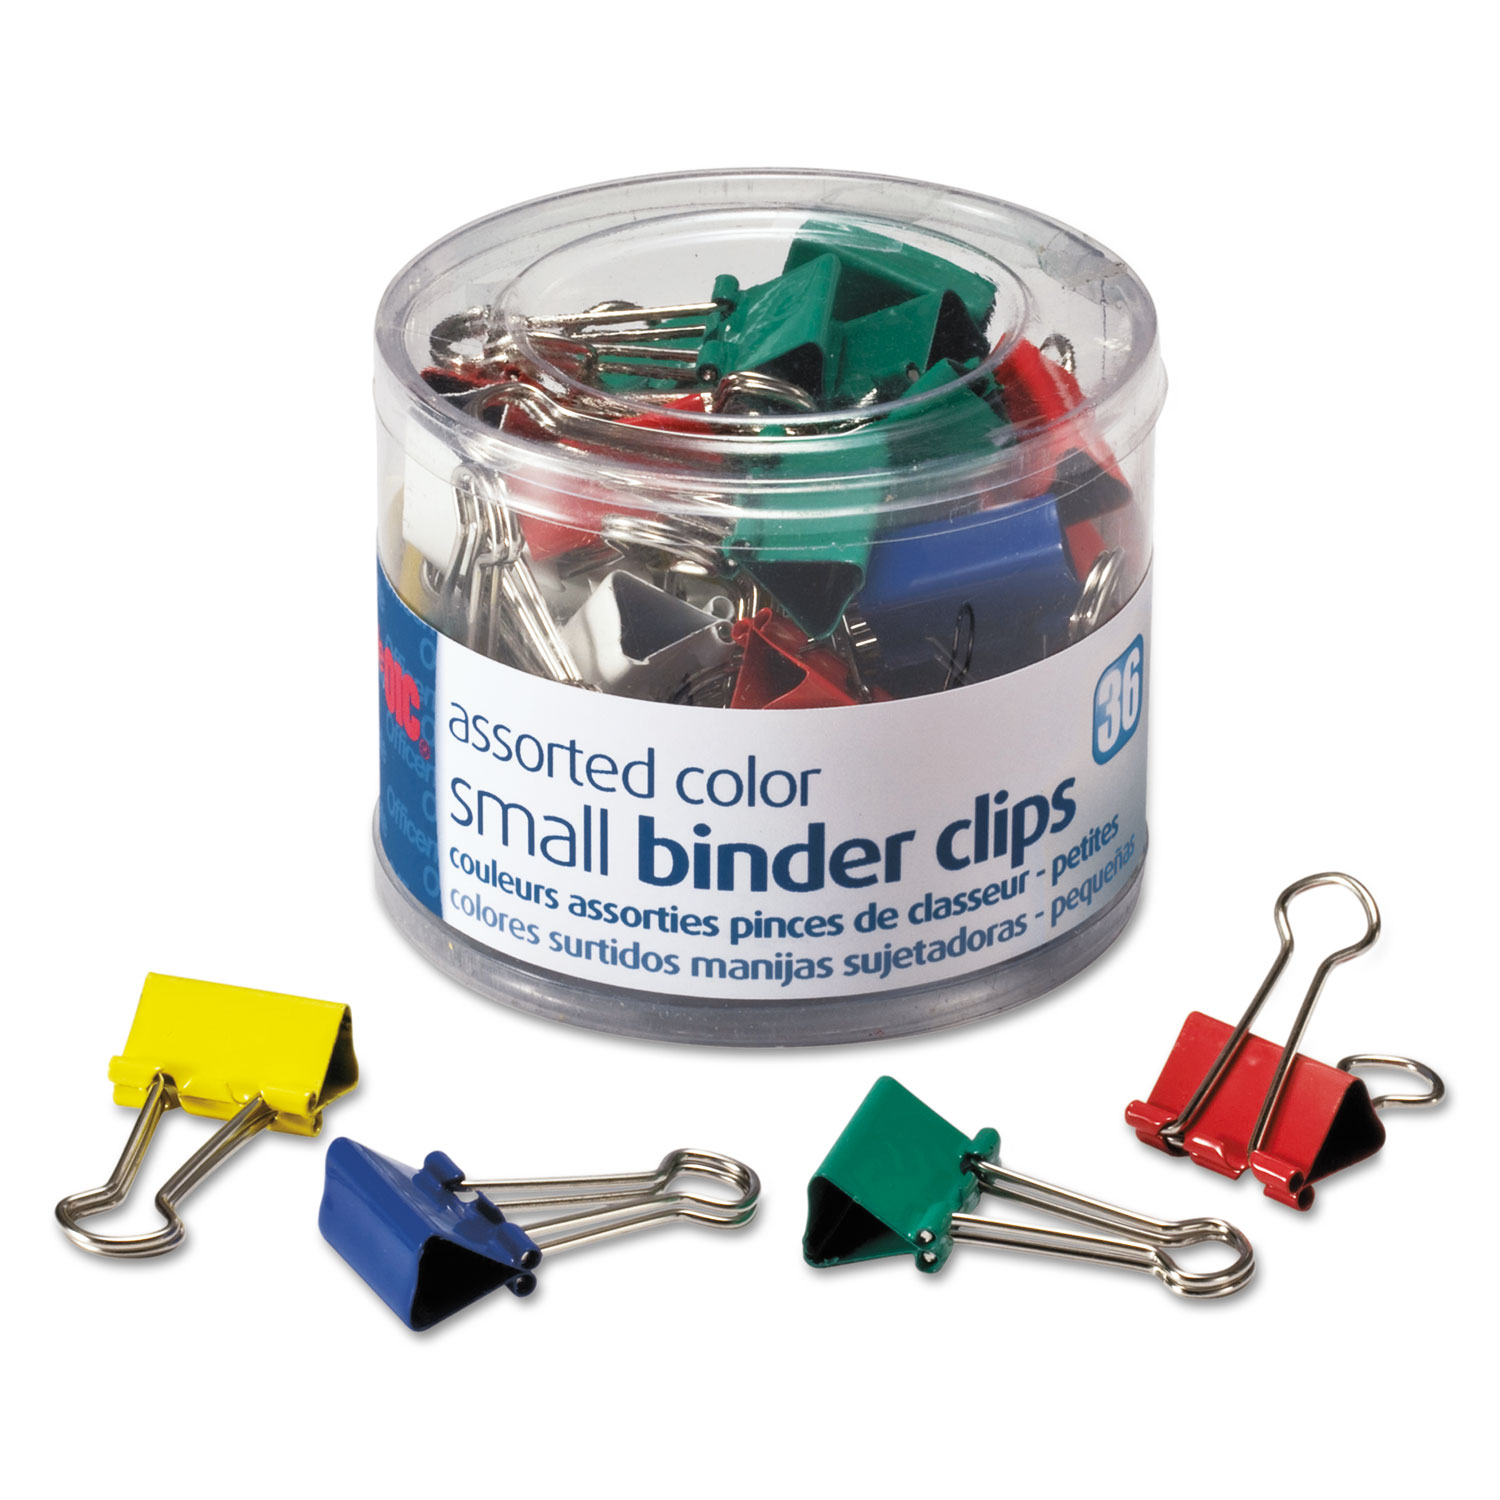  Officemate OIC31028 Assorted Colors Binder Clips, Small, 36/Pack (OIC31028) 